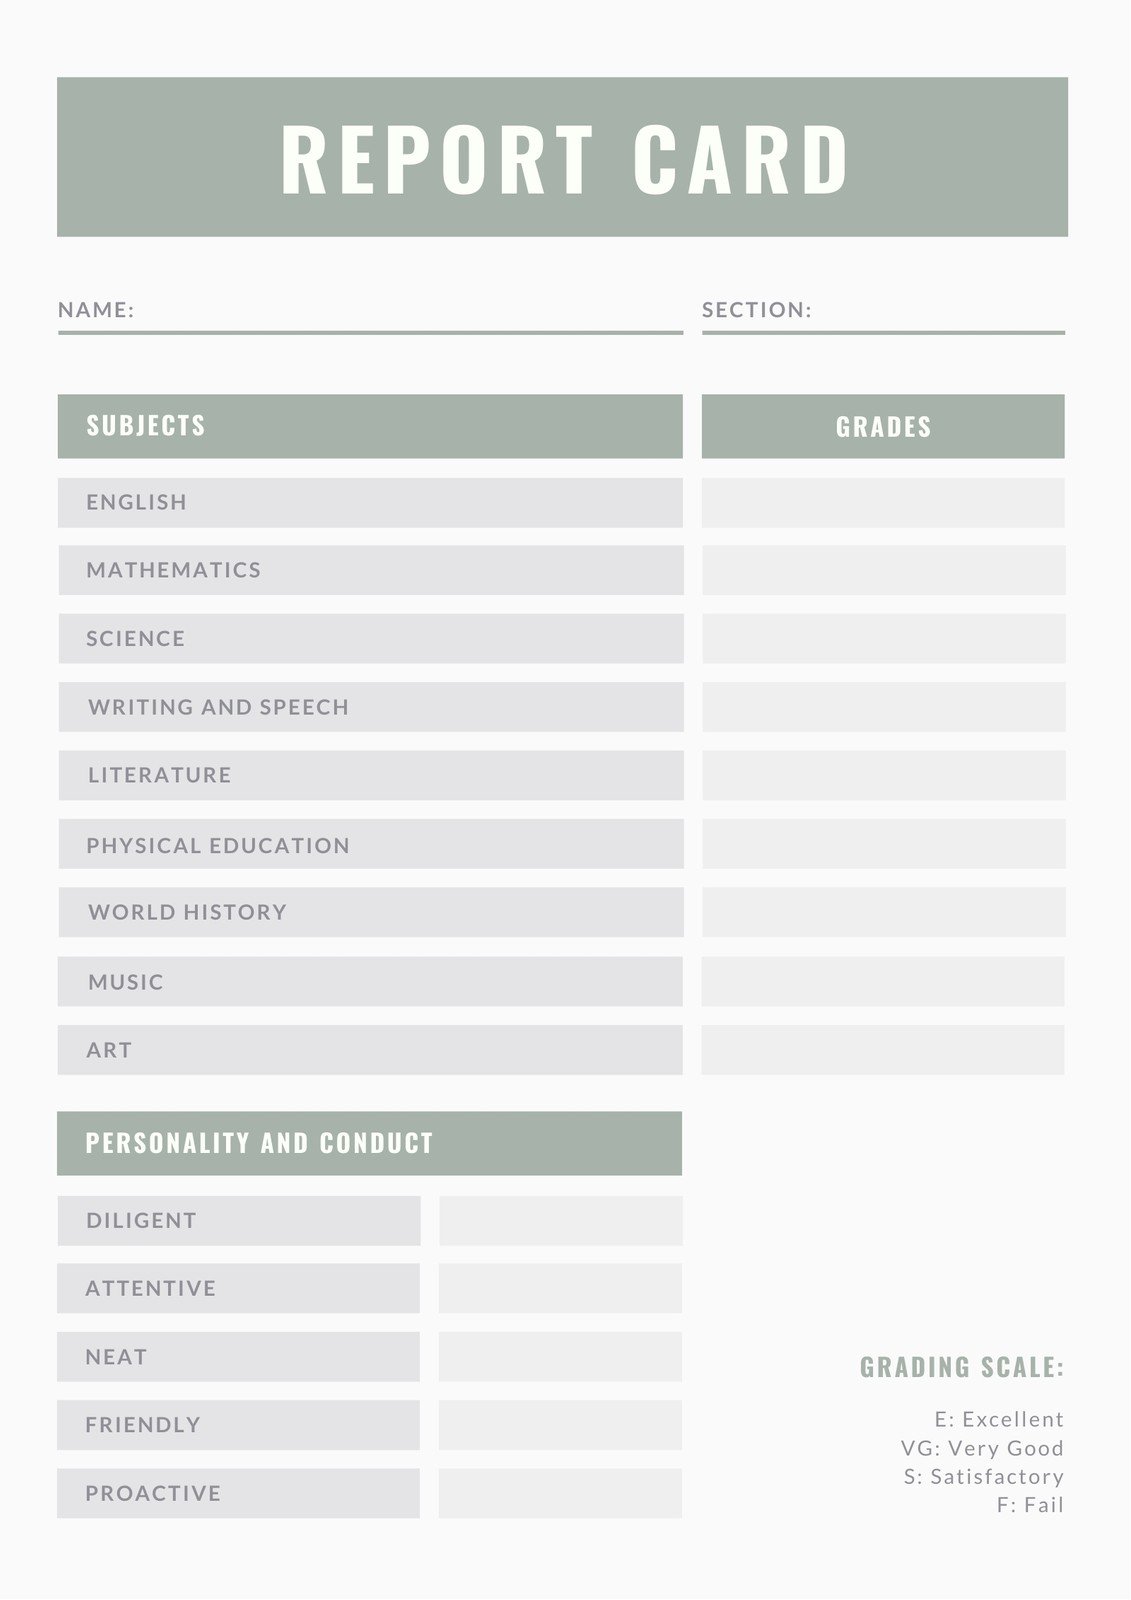 Free, printable, customizable report card templates  Canva With Report Card Format Template